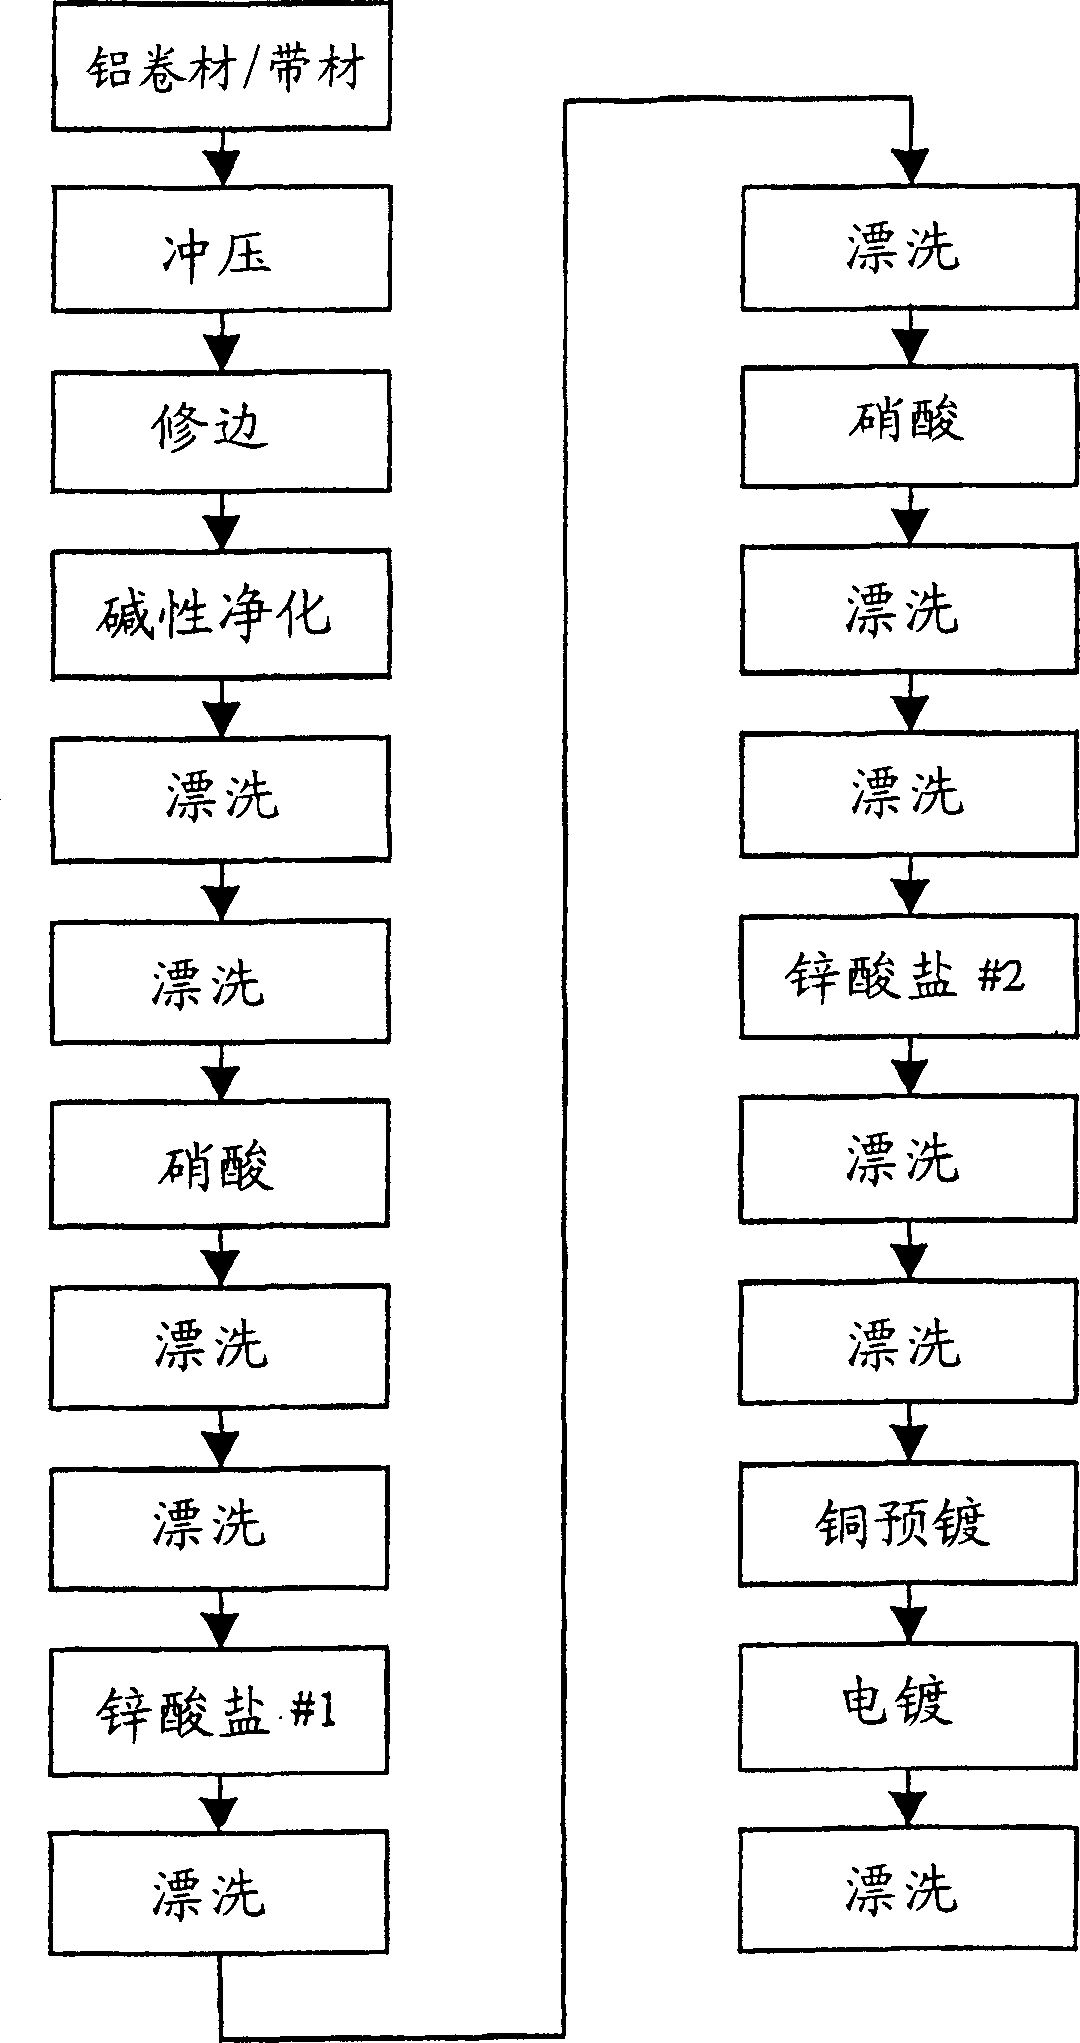 ELectroplated aluminium parts and process of production thereof